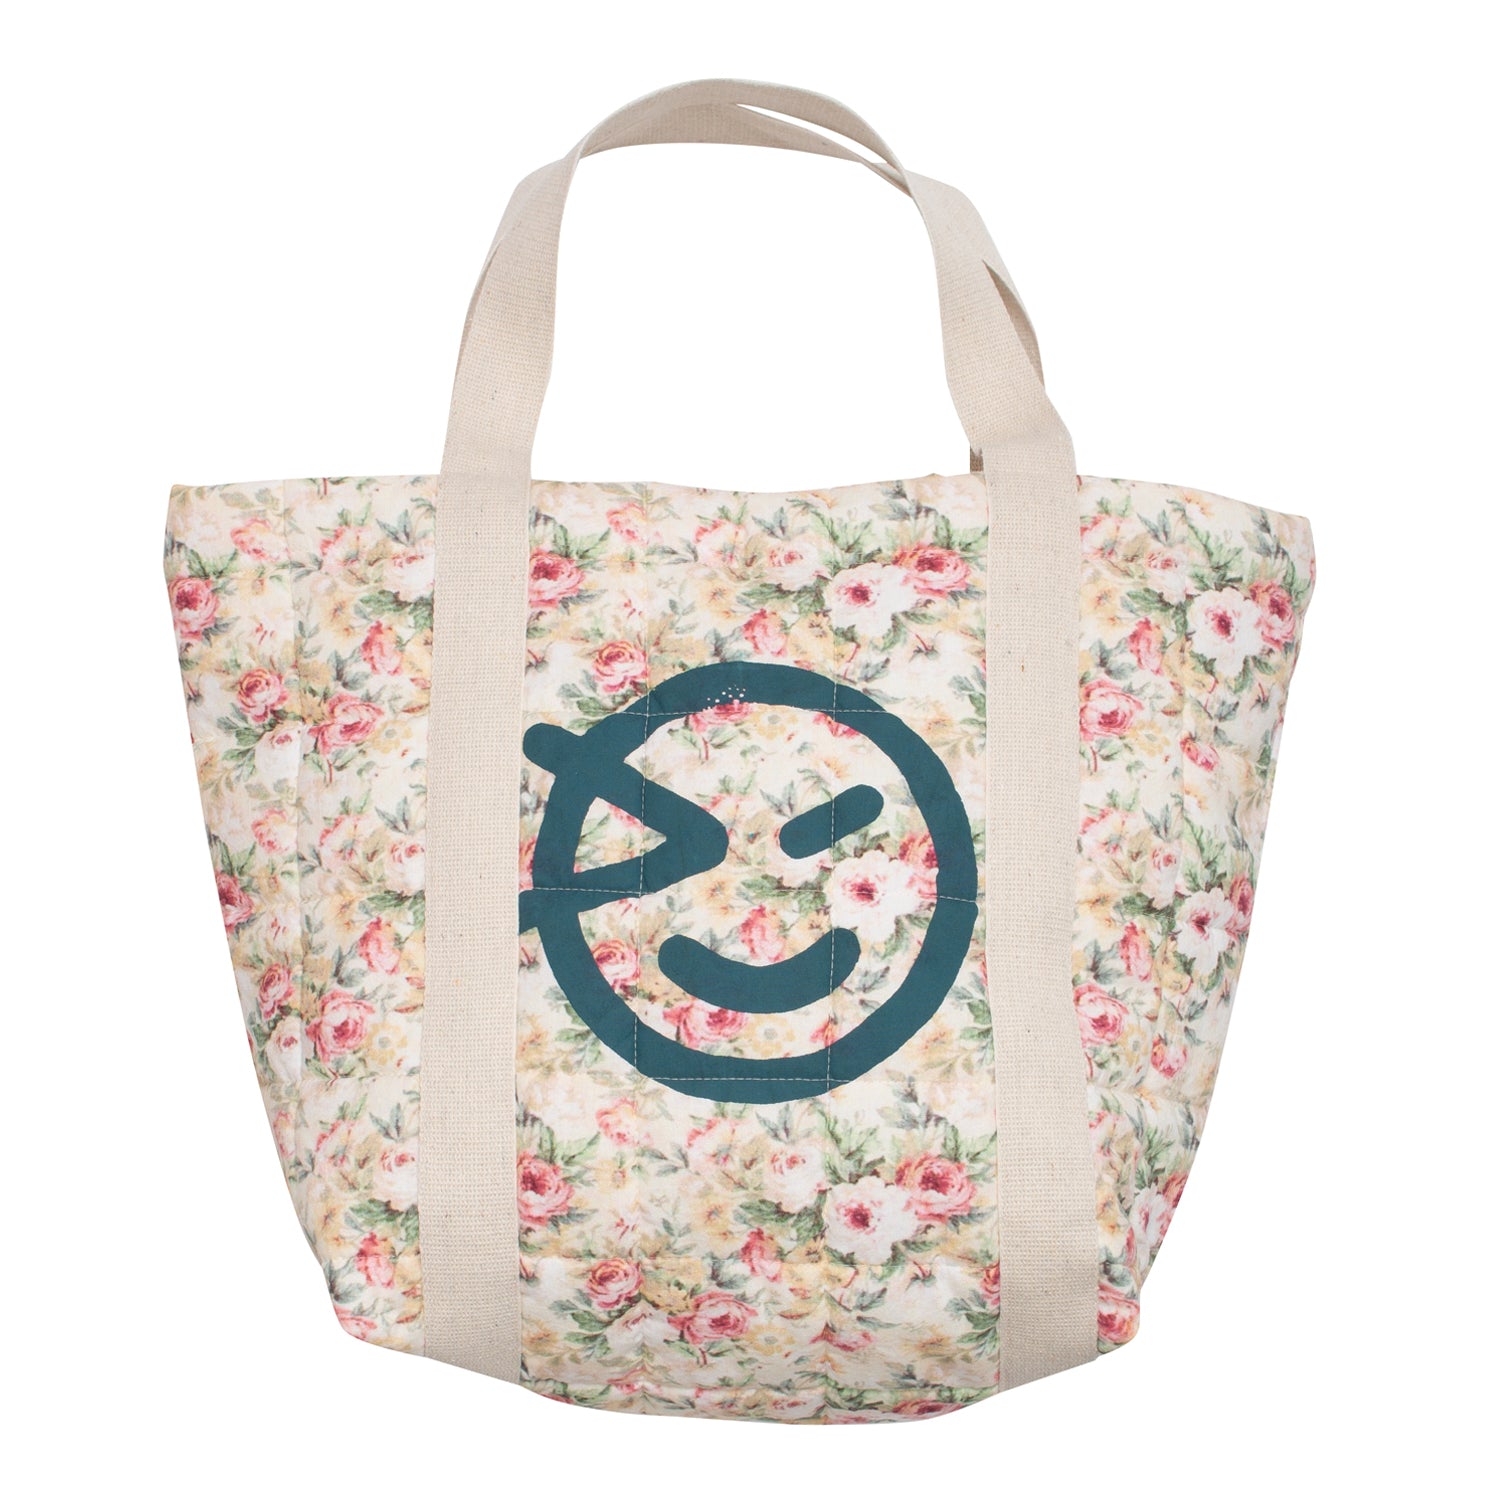 Tatto Padded Beach Bag - Floral